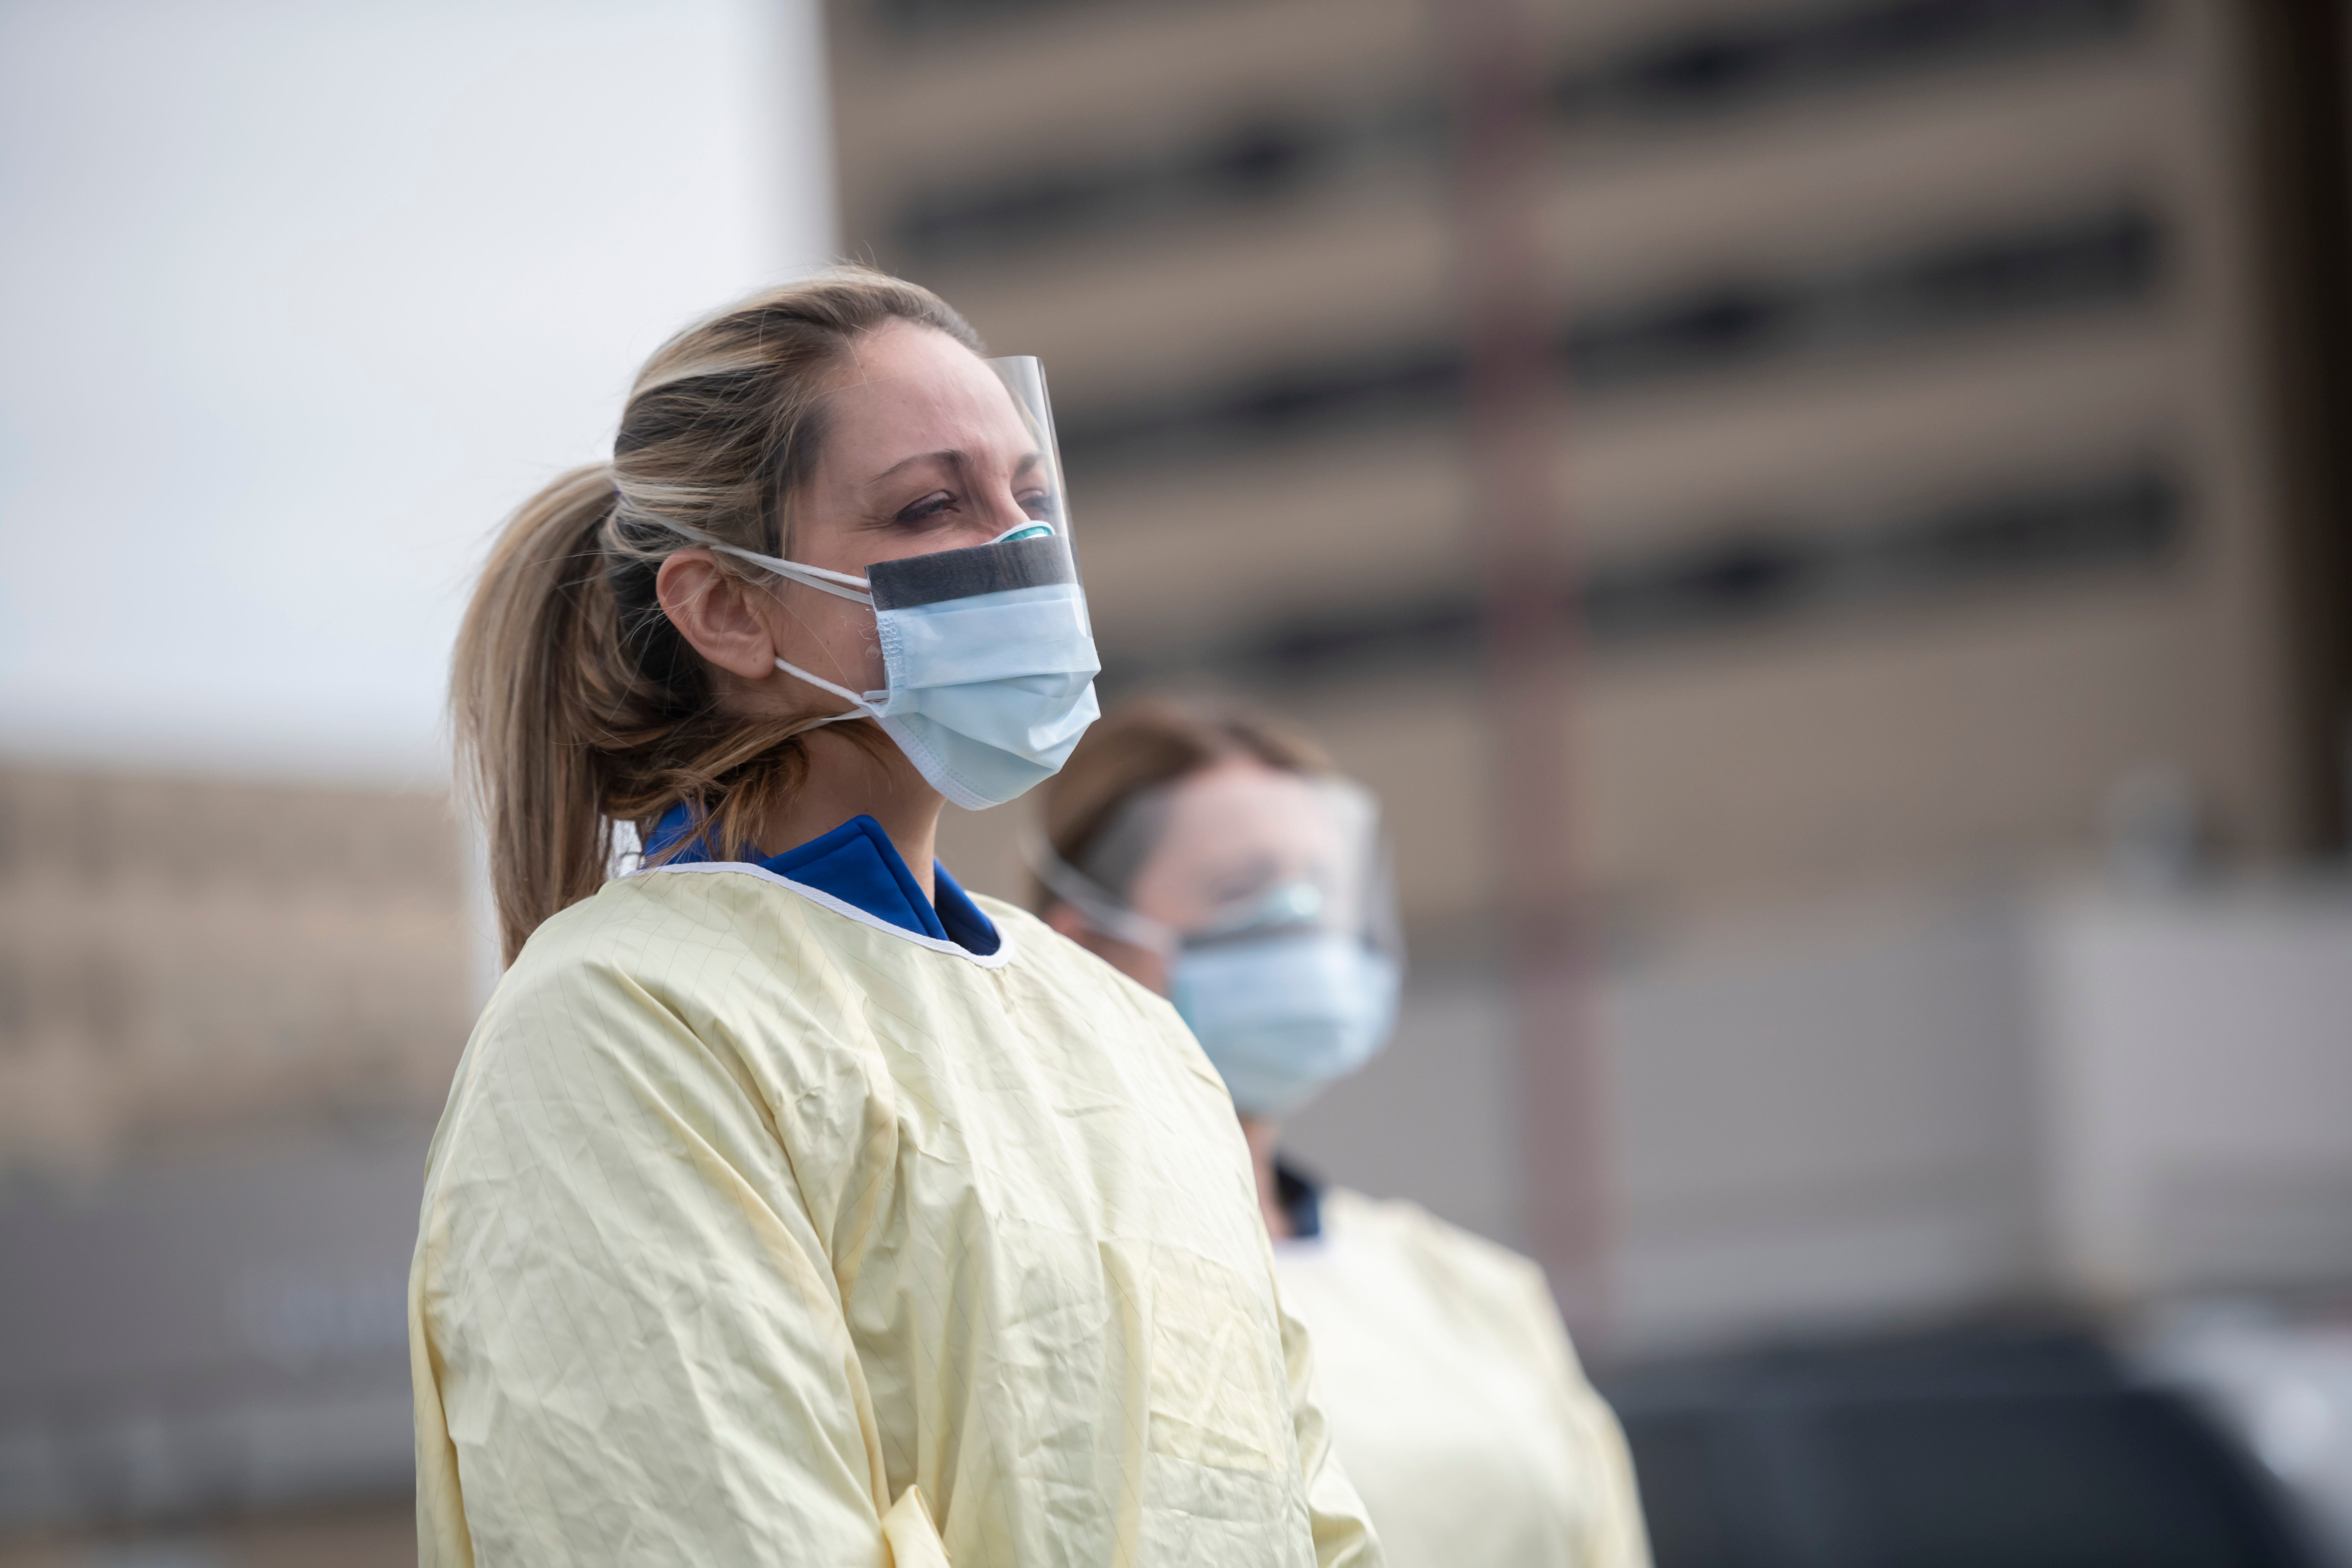 Physician assistant Jessica Hamilton, left, and, registered nurse Amena Beslic, director of the emergency center, stand in front of Beaumont hospital in Royal Oak during a press conference, March 16, 2020. Members of the public concerned that they may be infected with the coronavirus were able to get screening done from their vehicles.